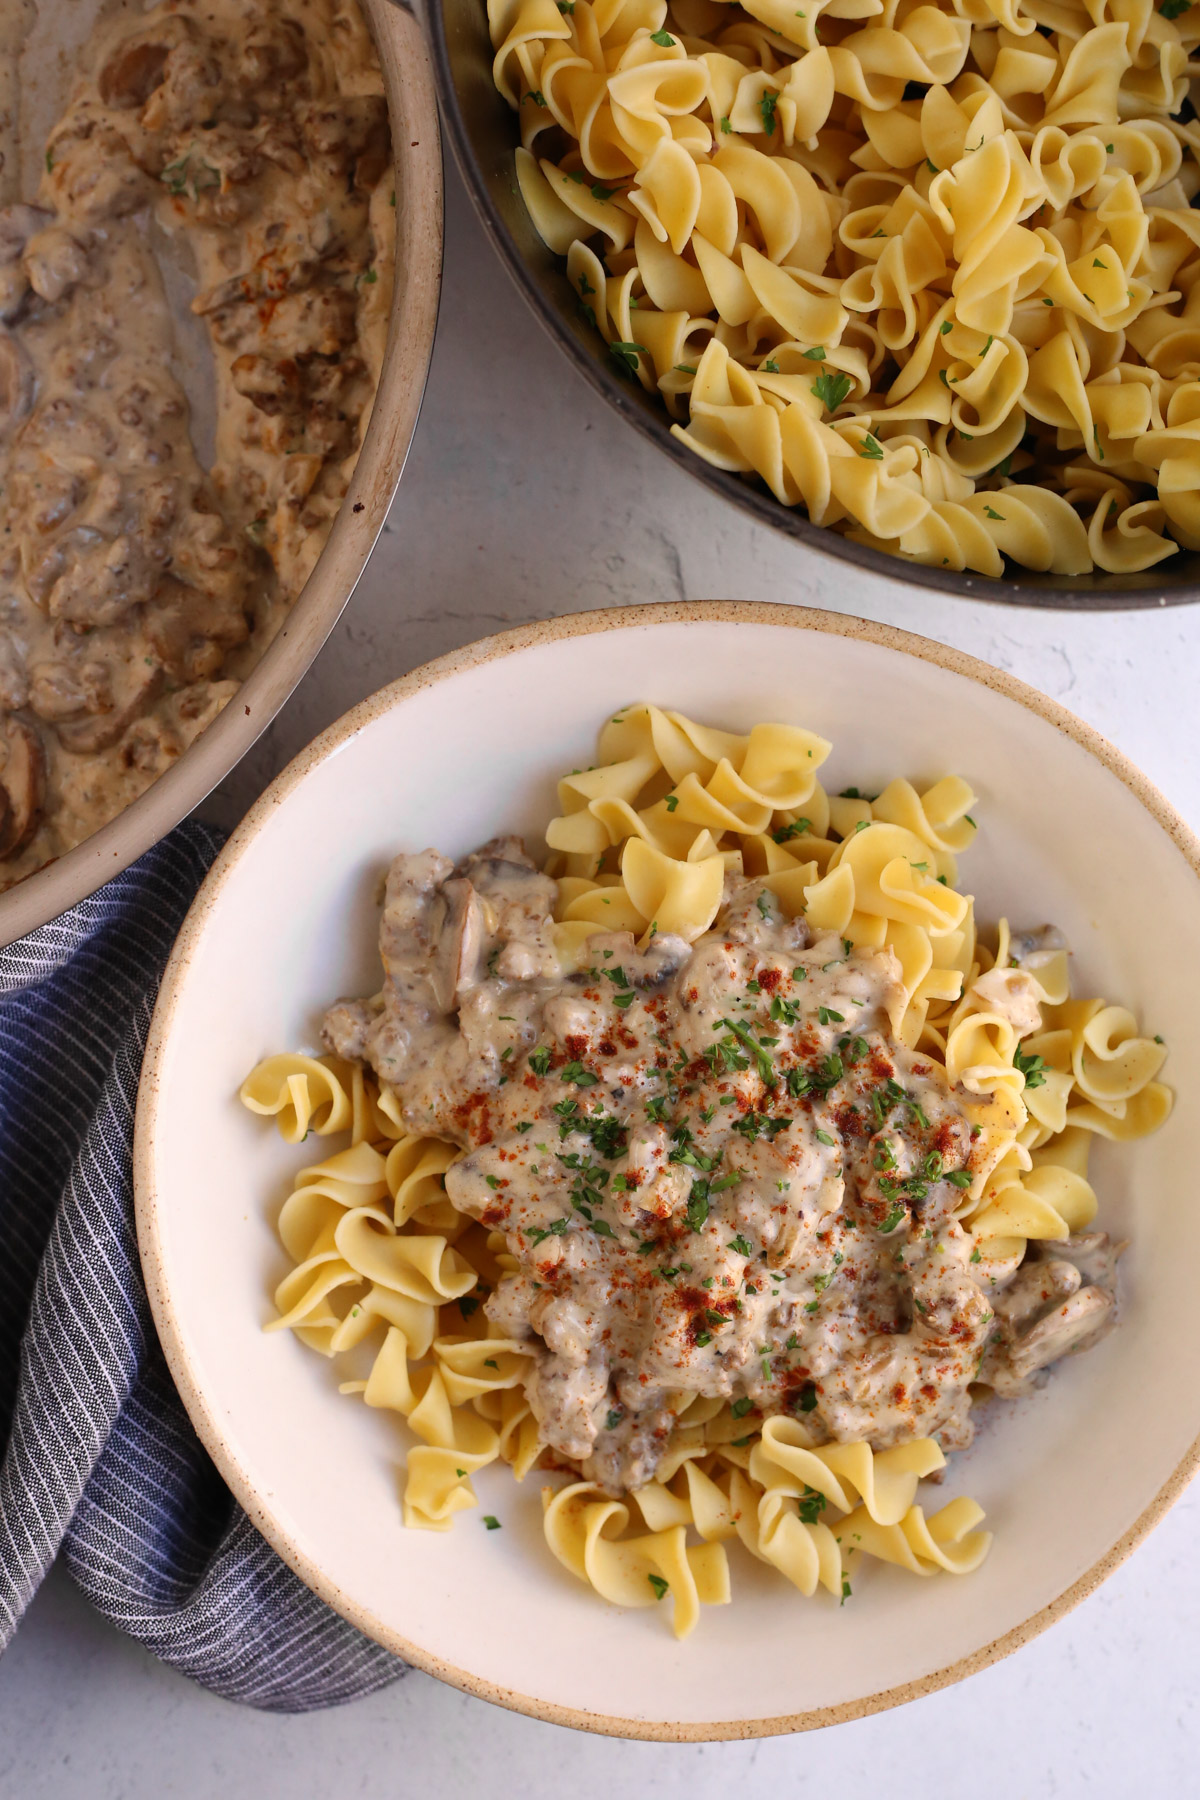 Overhead view of a ground beef stroganoff recipe served over egg noodles